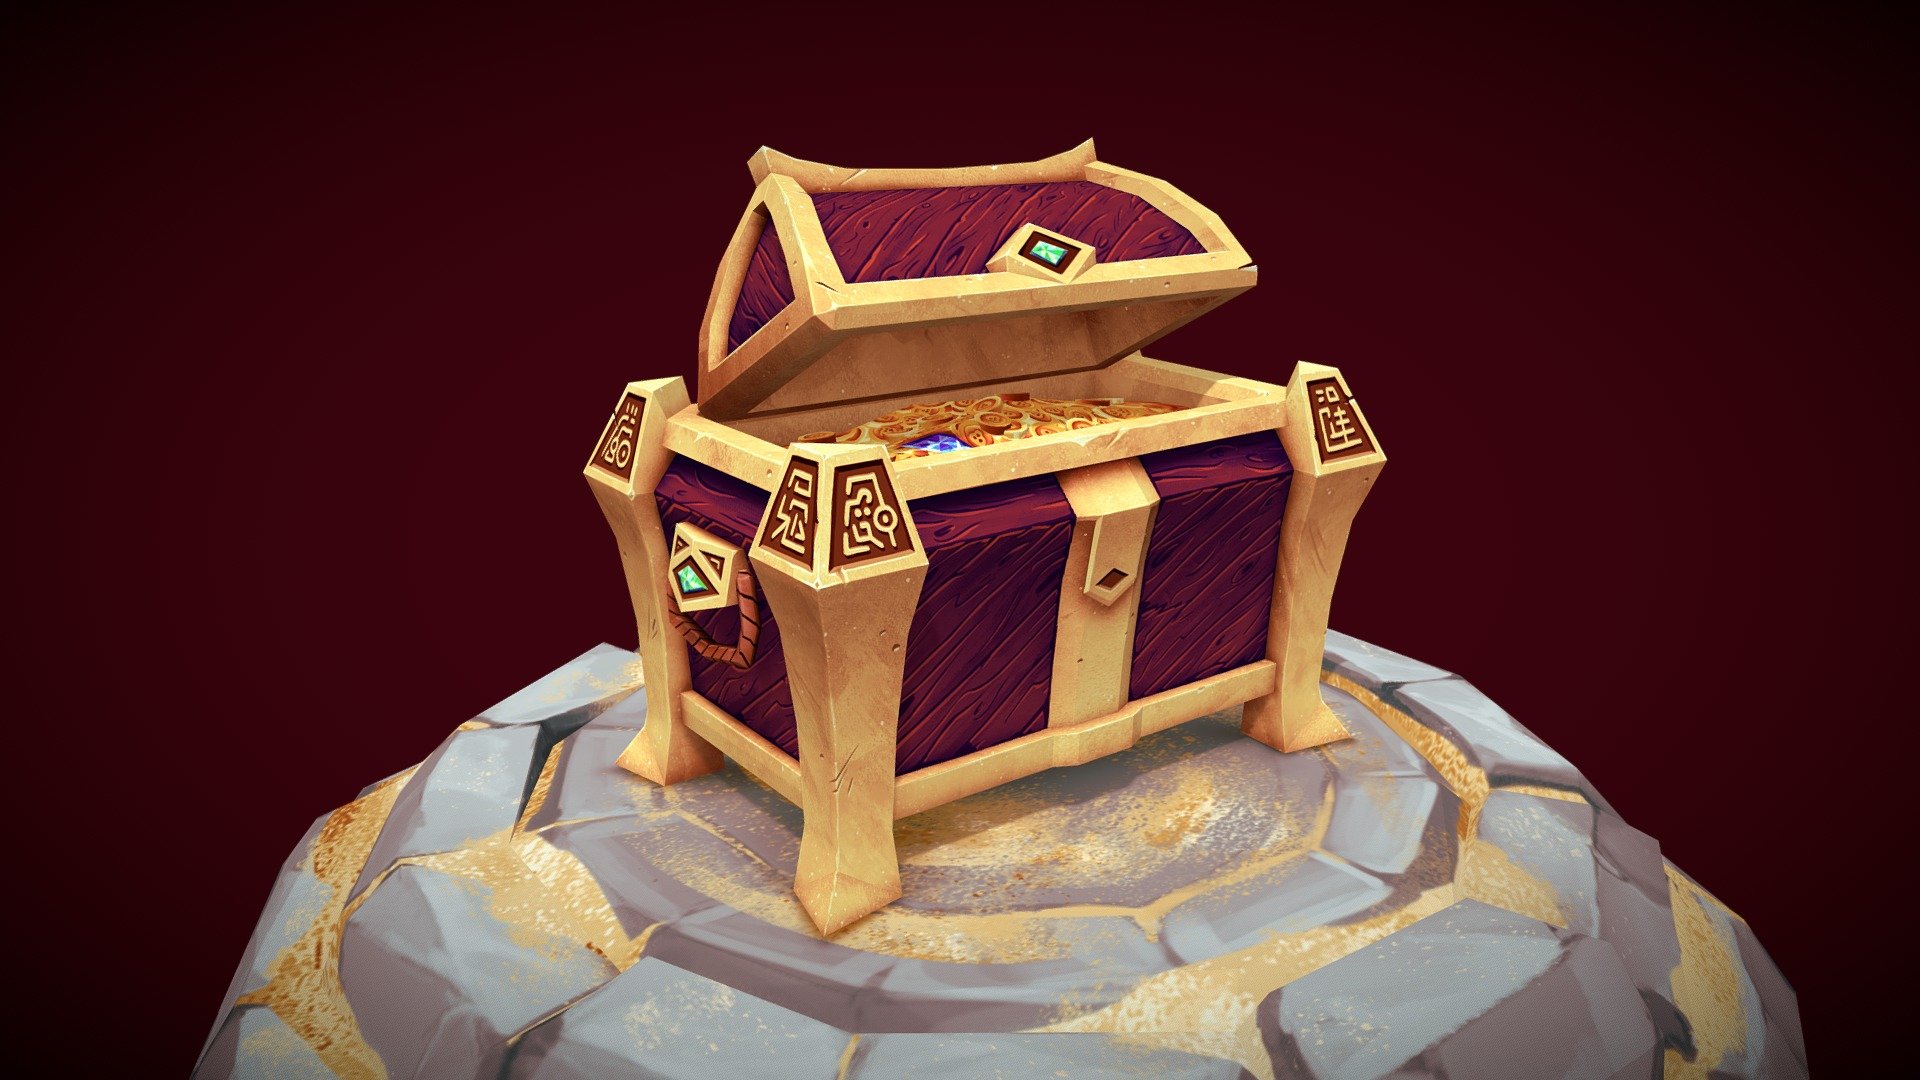 Hand painted Low Poly treasure chest as my first project at DMU

Was inspired little by east asian culture, mixed with sea of theives and the &ldquo;Watcher of Greed